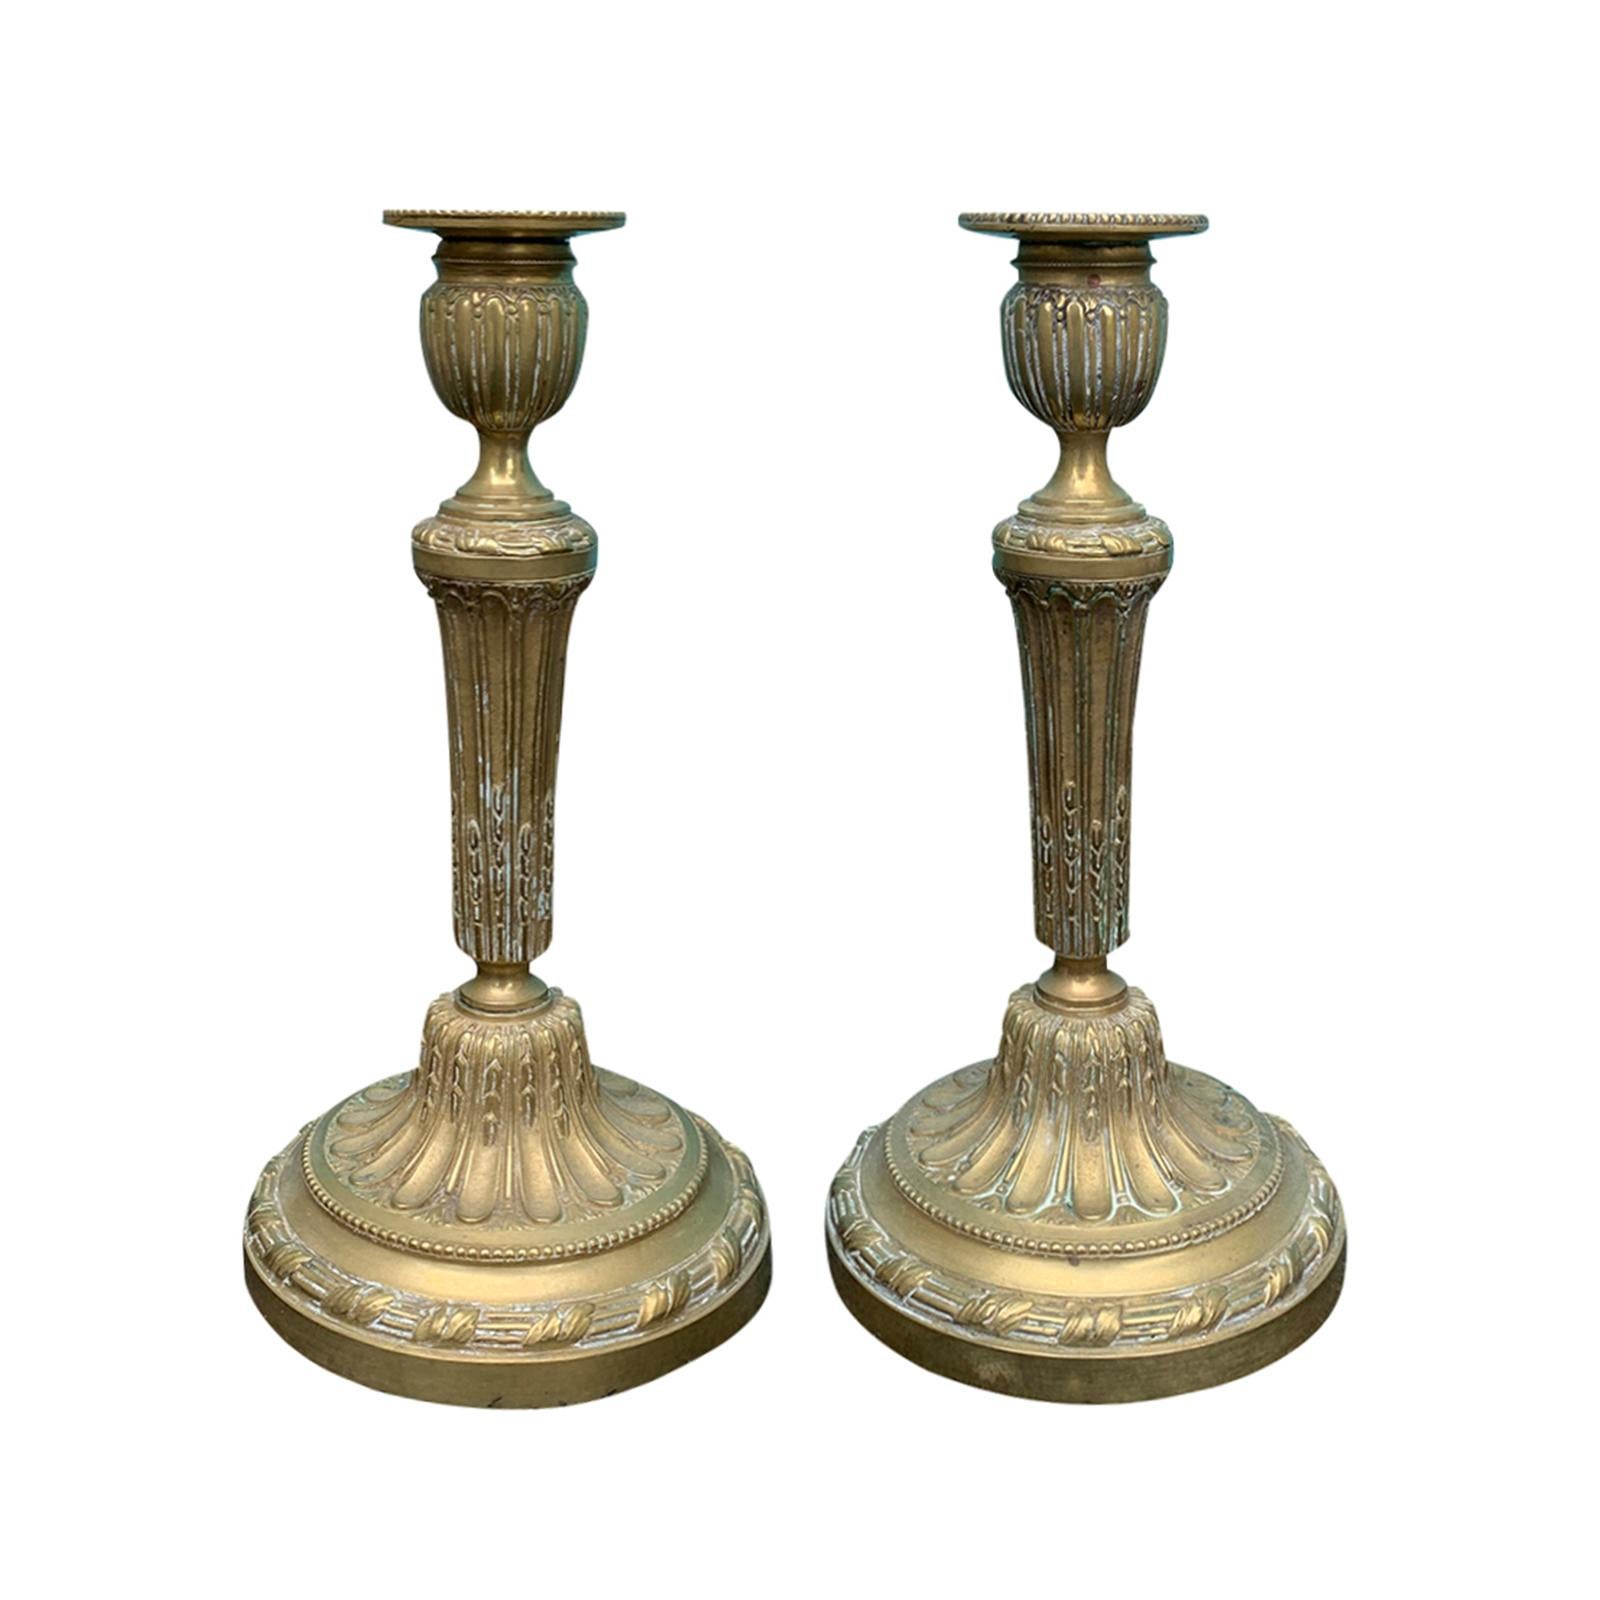 Pair of 19th Century Louis XVI Style Bronze Candlesticks, Marked Made in France